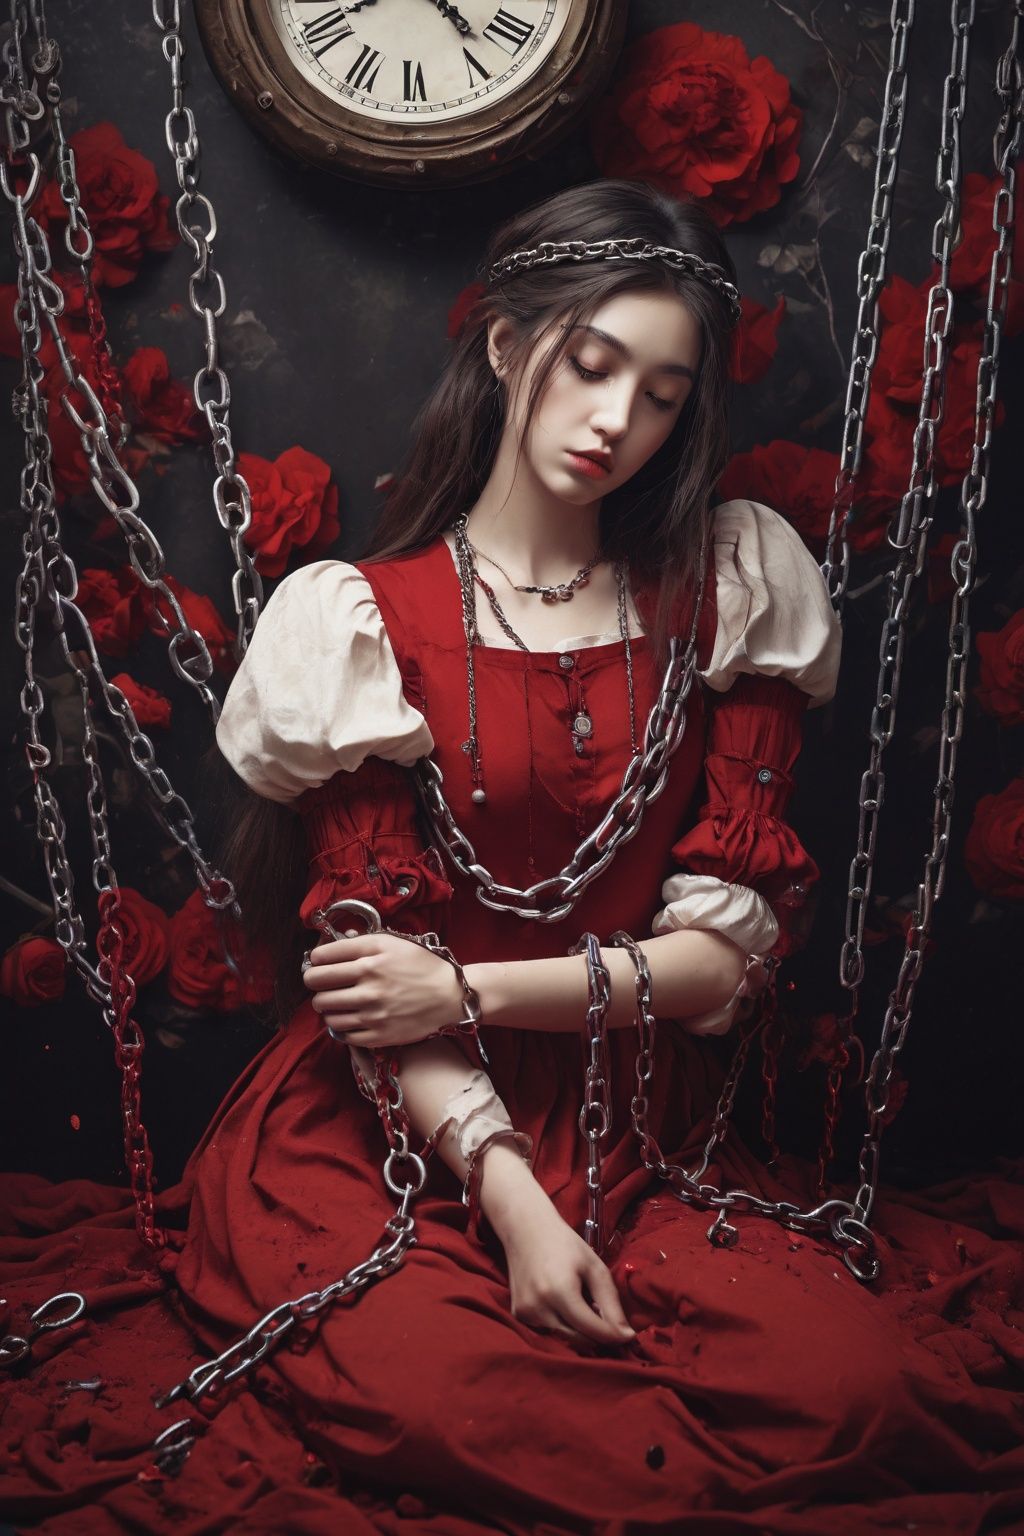 Surrealistic imagery,dreamlike atmosphere,vibrant and contrasting colors,intricate and detailed elements,somber lighting,introspective composition,surrounding emptiness,1girl,melancholic,melancholy,nostalgic,a sense of solitude,dress,long hair,blood splatter,chain,clock,roman numeral,hairband,floating hair,petals,chromatic aberration,puffy sleeves,floating,red chain,cuffs,(red chained:1.3),(red broken_chain:1.3),shackles,blood,handcuffs,anchor,broken,( red chain_restraint:1.4),JnTrp,